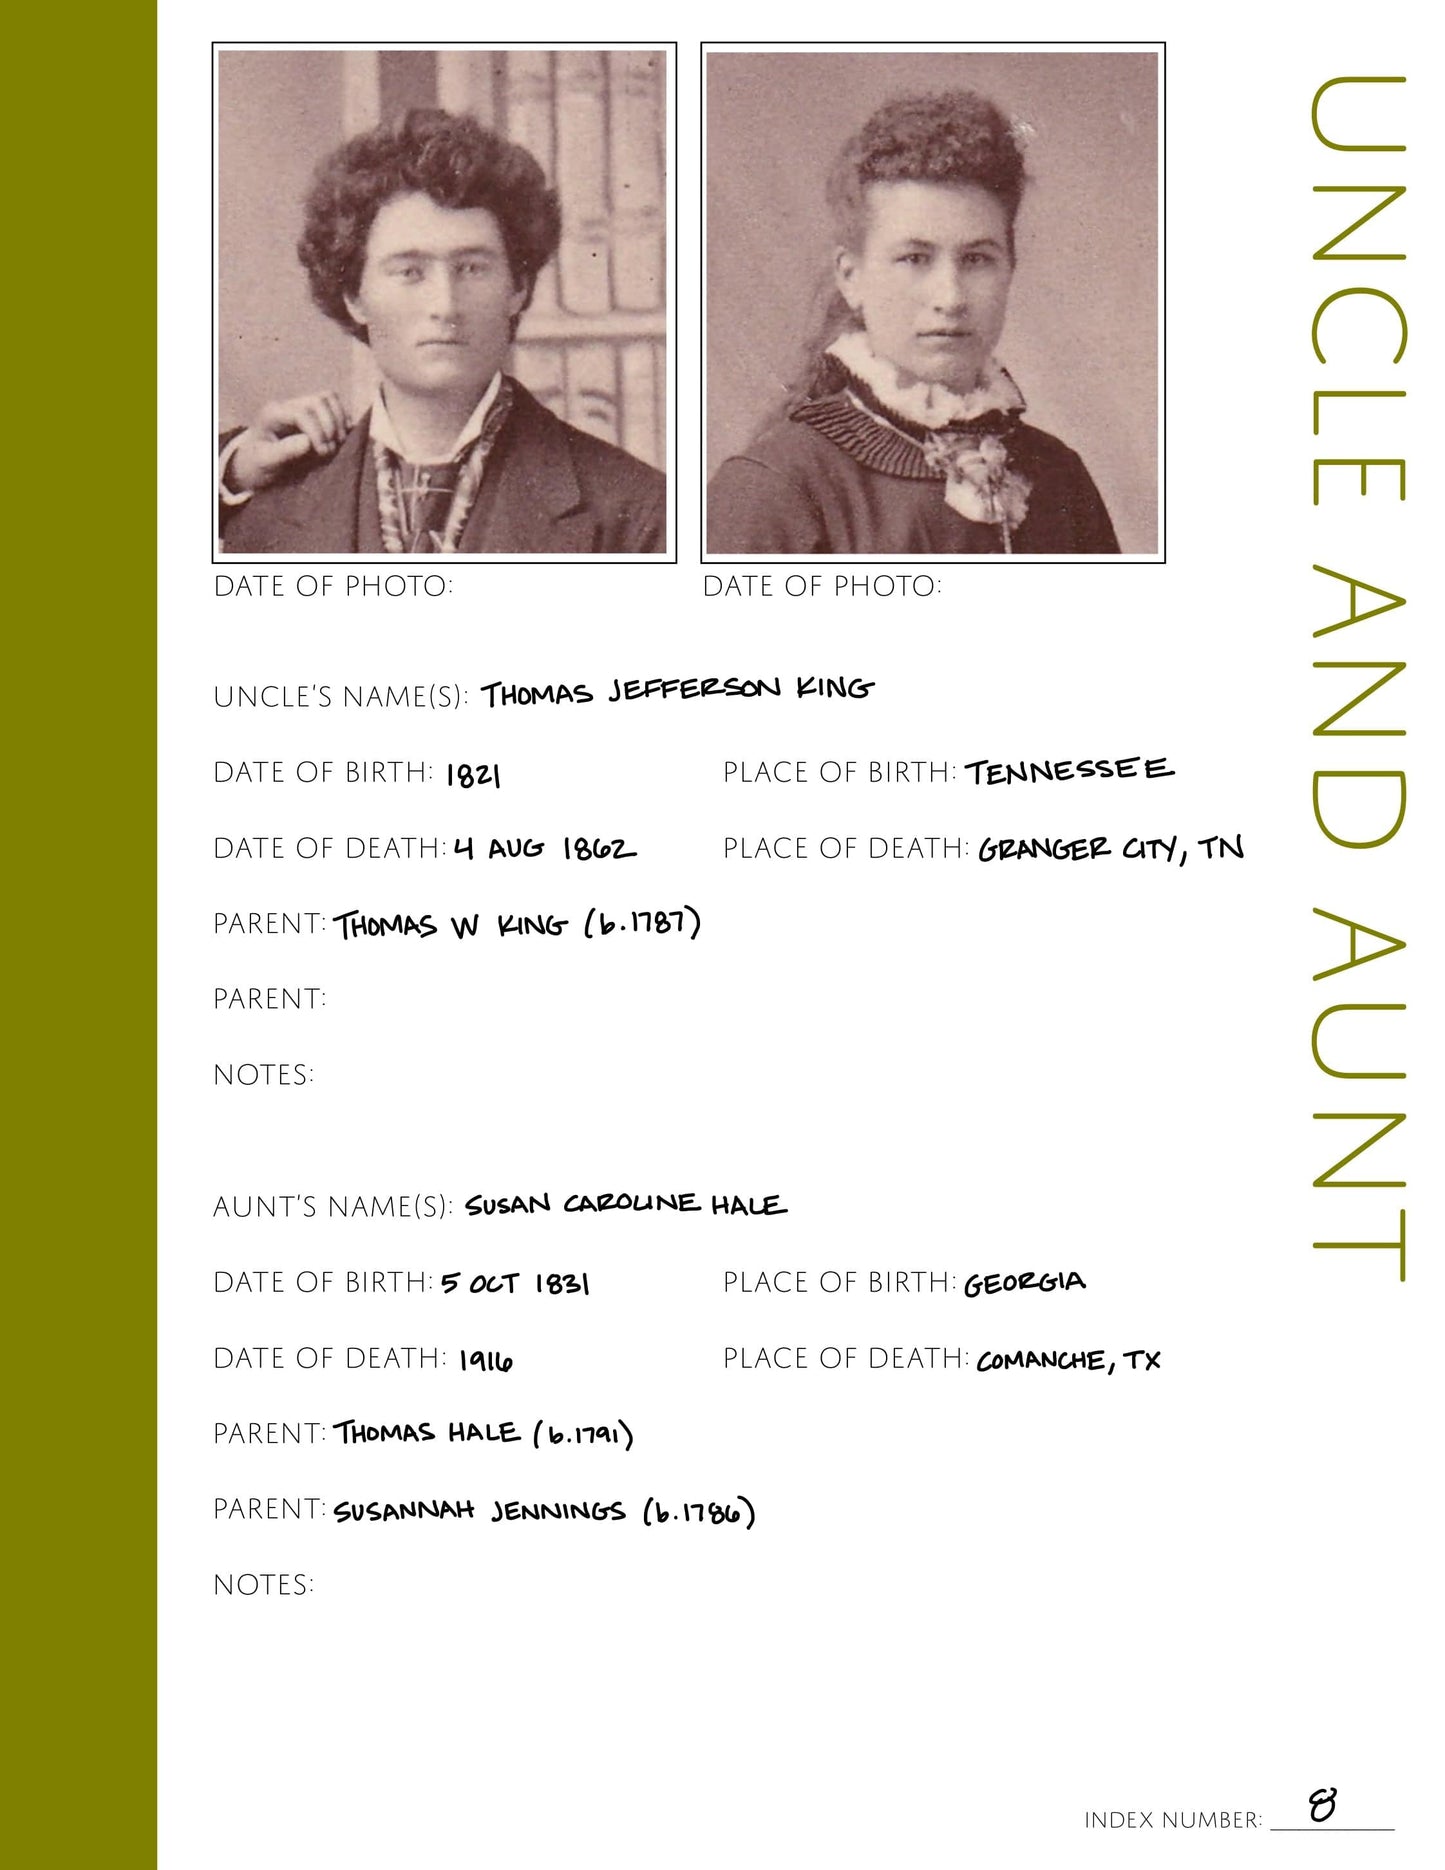 Uncle and Aunt: Printable Genealogy Form (Digital Download) - Family Tree Notebooks